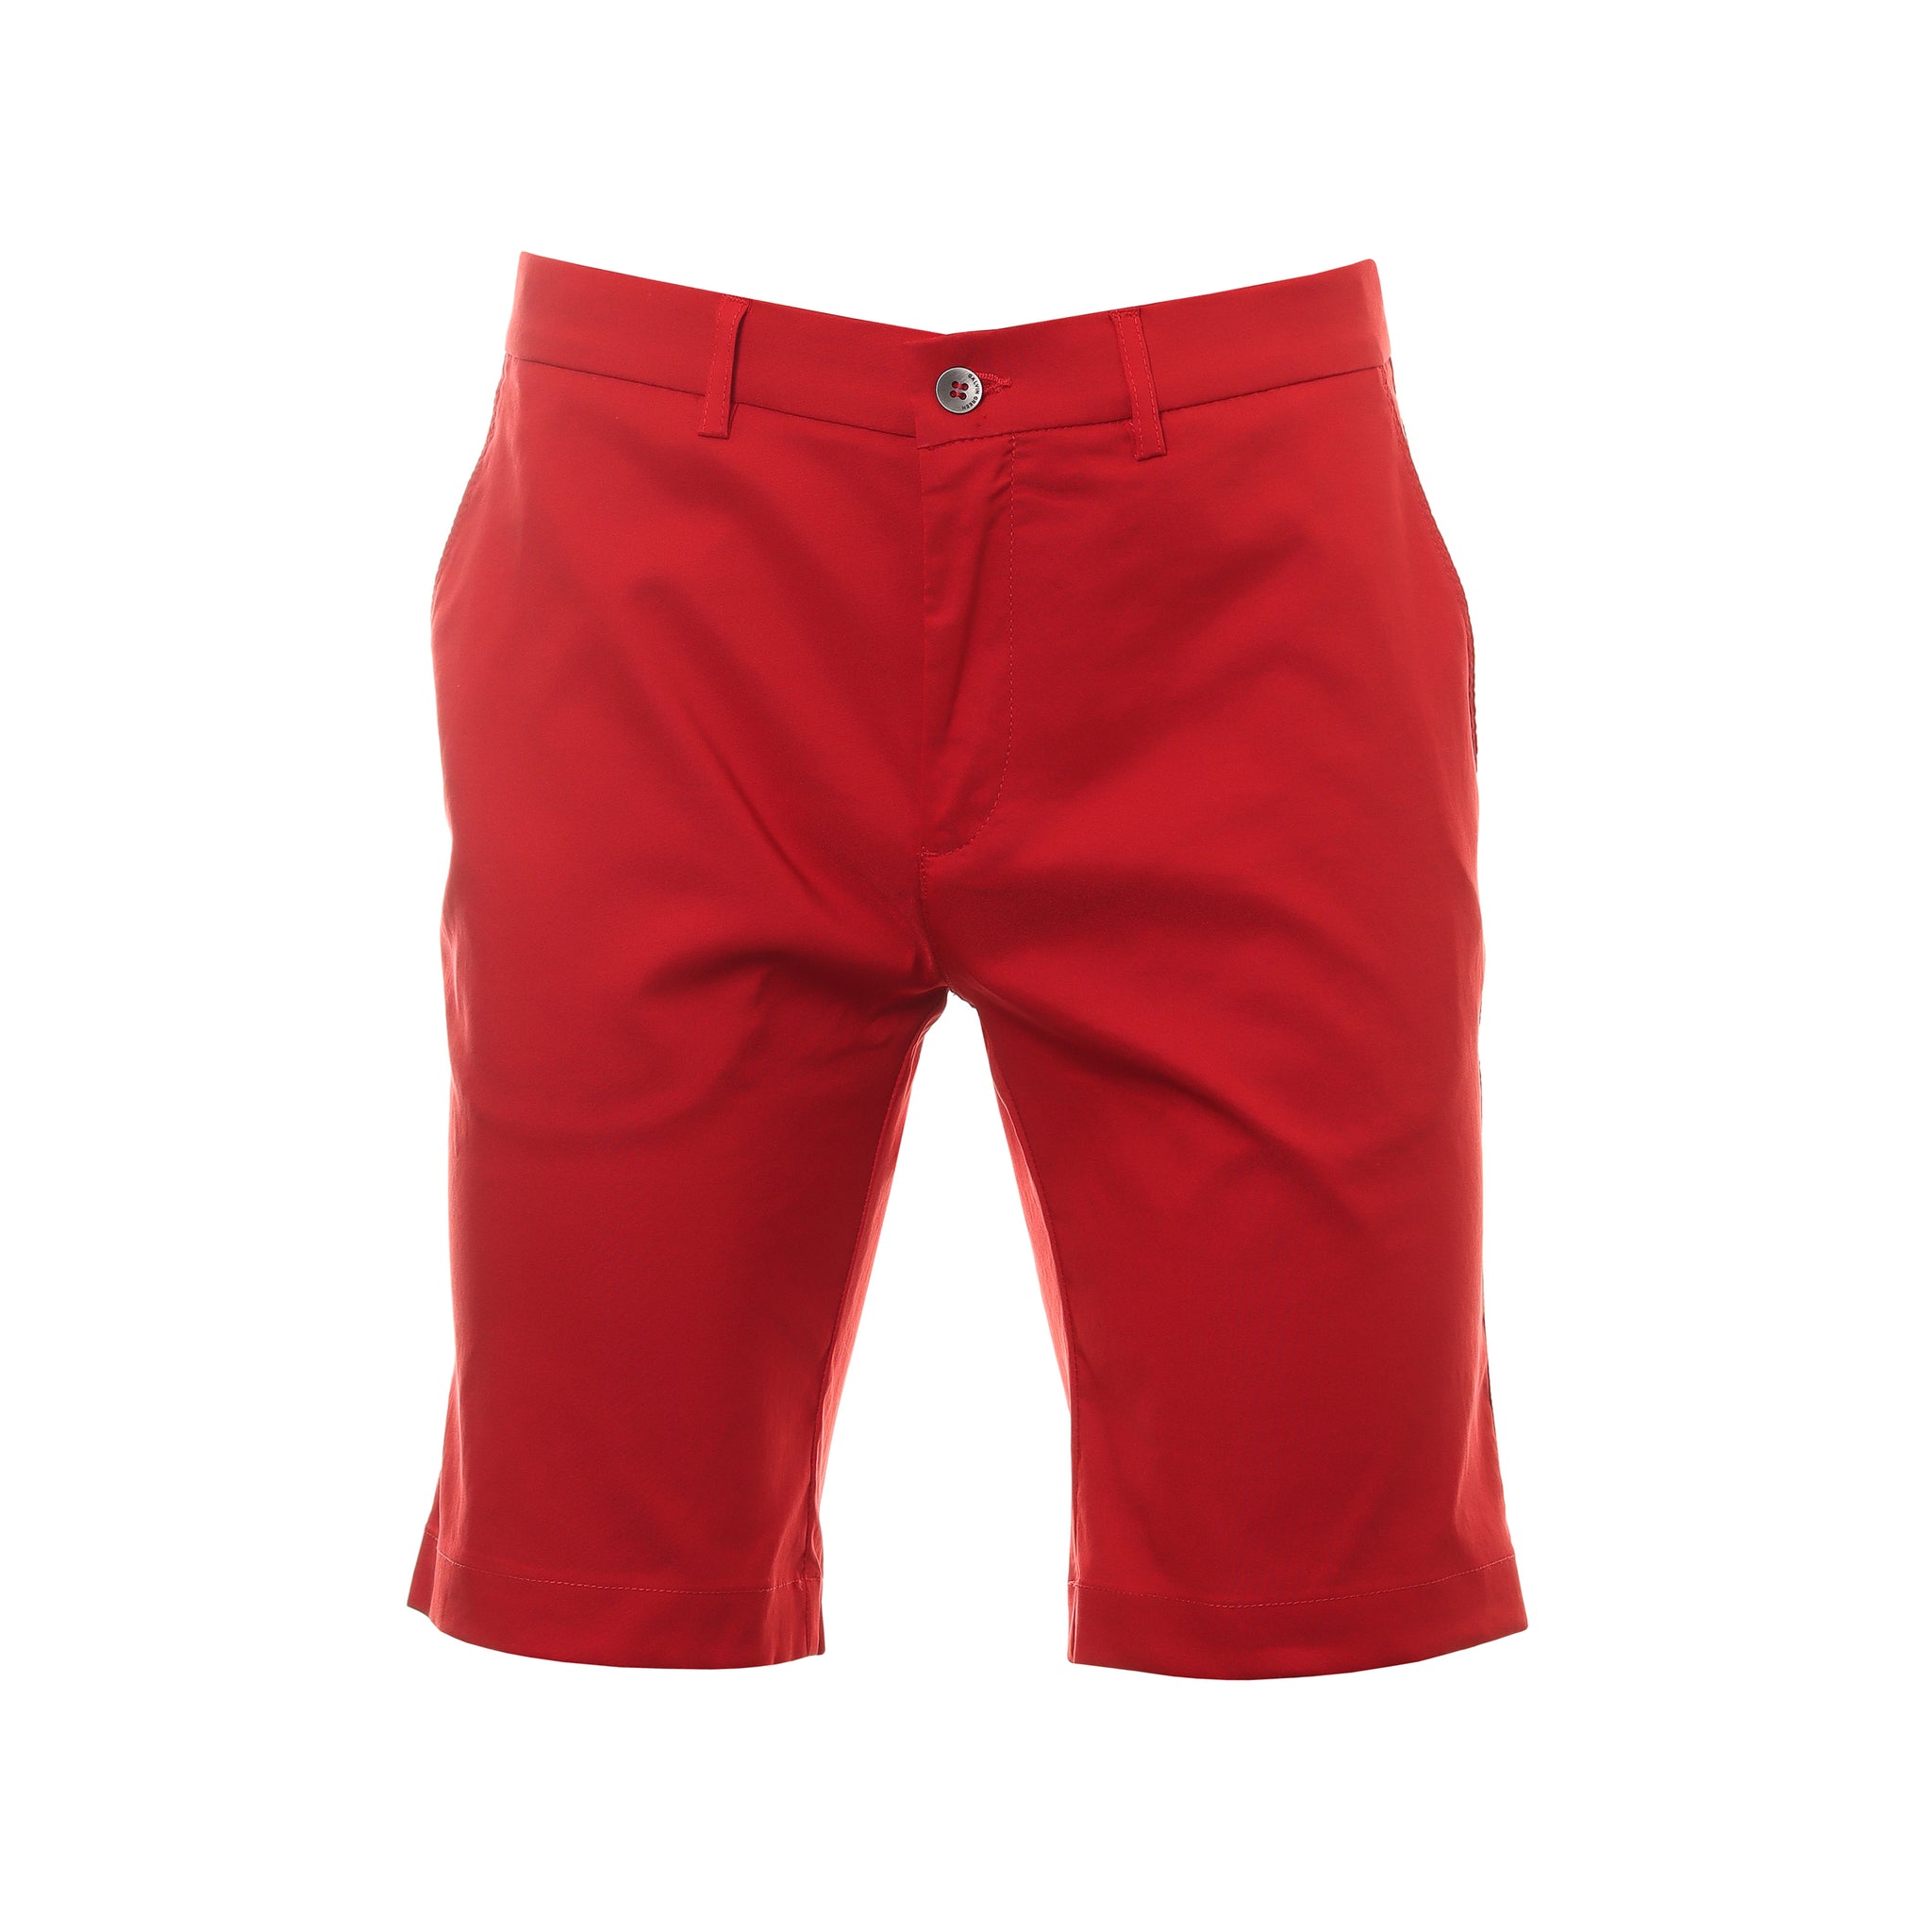 Galvin Green Paul Ventil8+ Golf Shorts Red 9413 | Function18